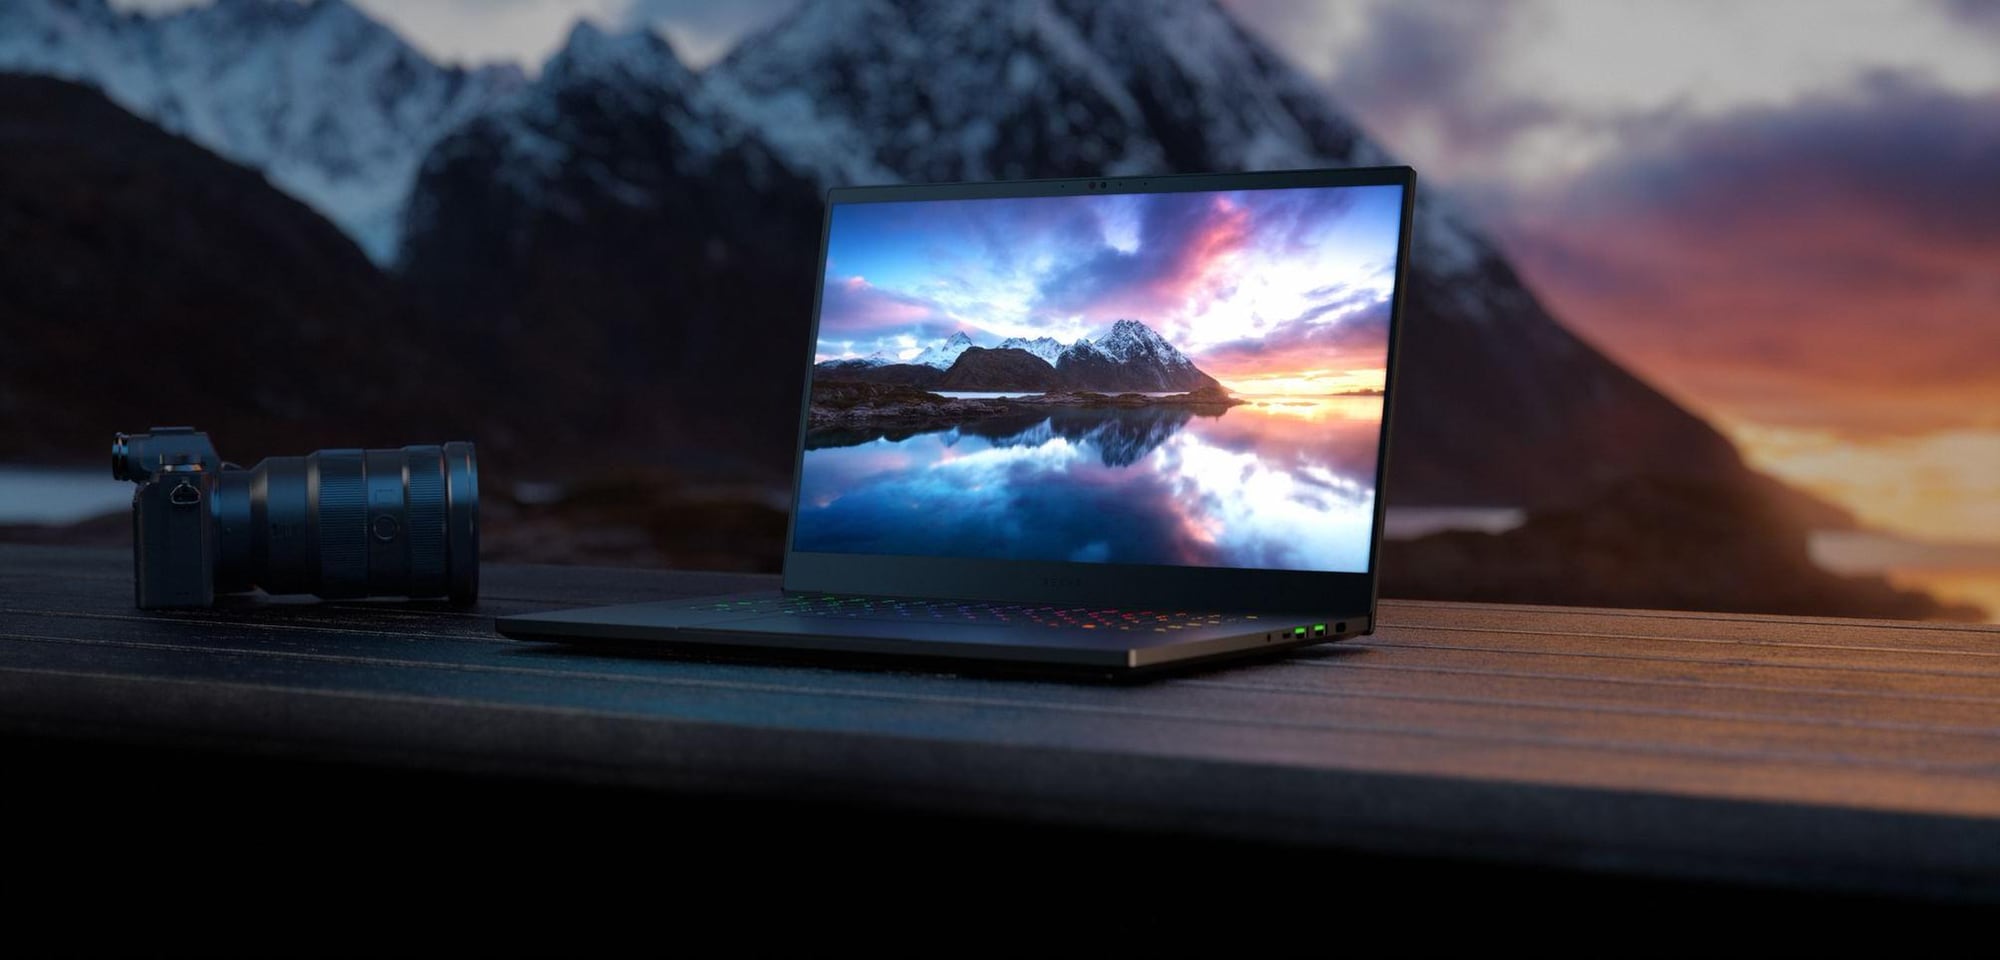 Razer’s latest Blade 15 is the world’s first laptop with a 240Hz OLED display